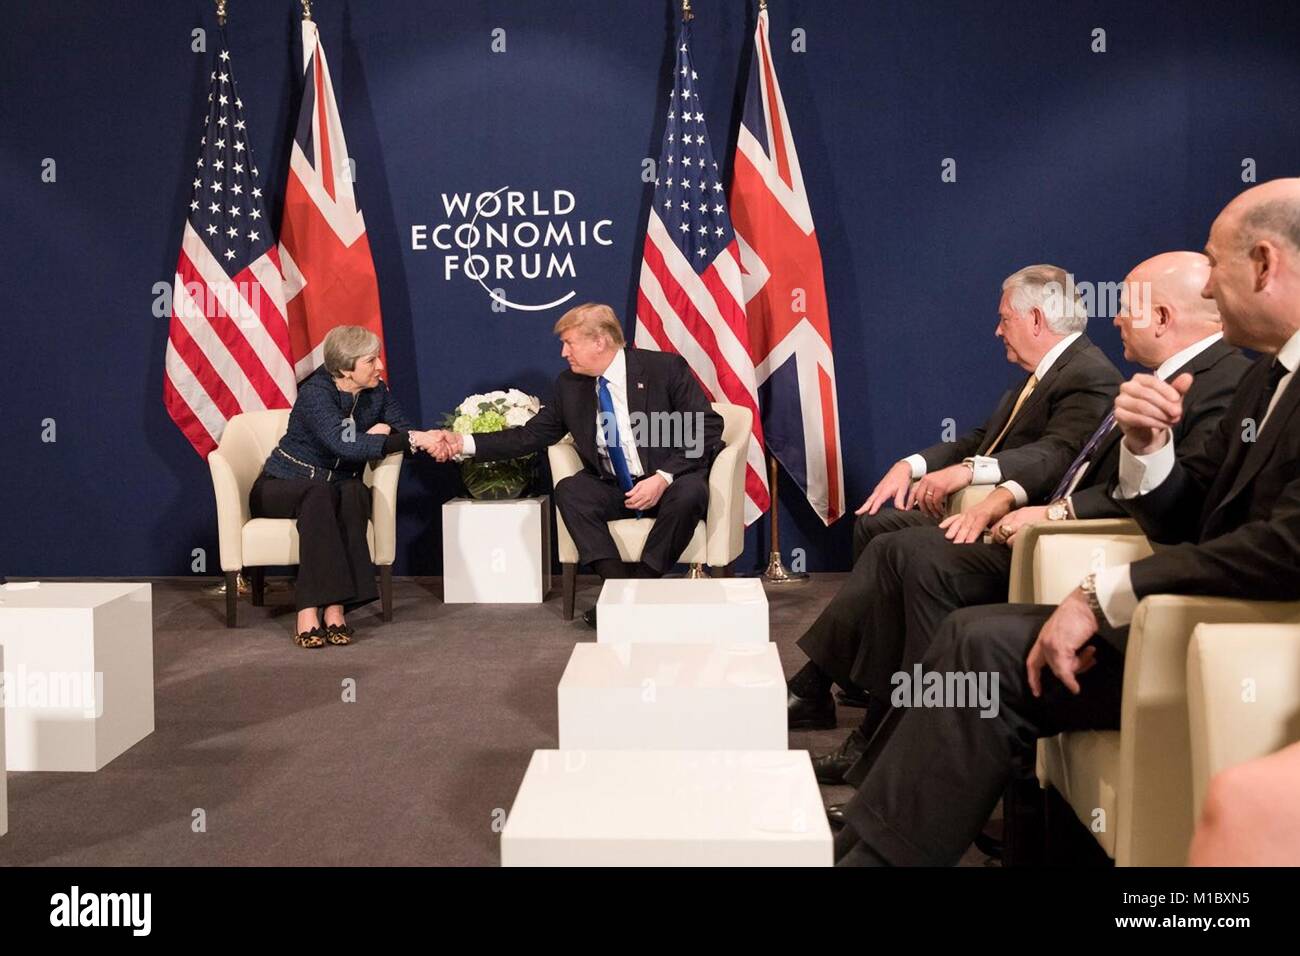 U.S President Donald Trump shakes hands with British Prime Minister Theresa May, left, during a bilateral meeting on the sidelines of the World Economic Forum January 26, 2018 in Davos, Switzerland. Stock Photo